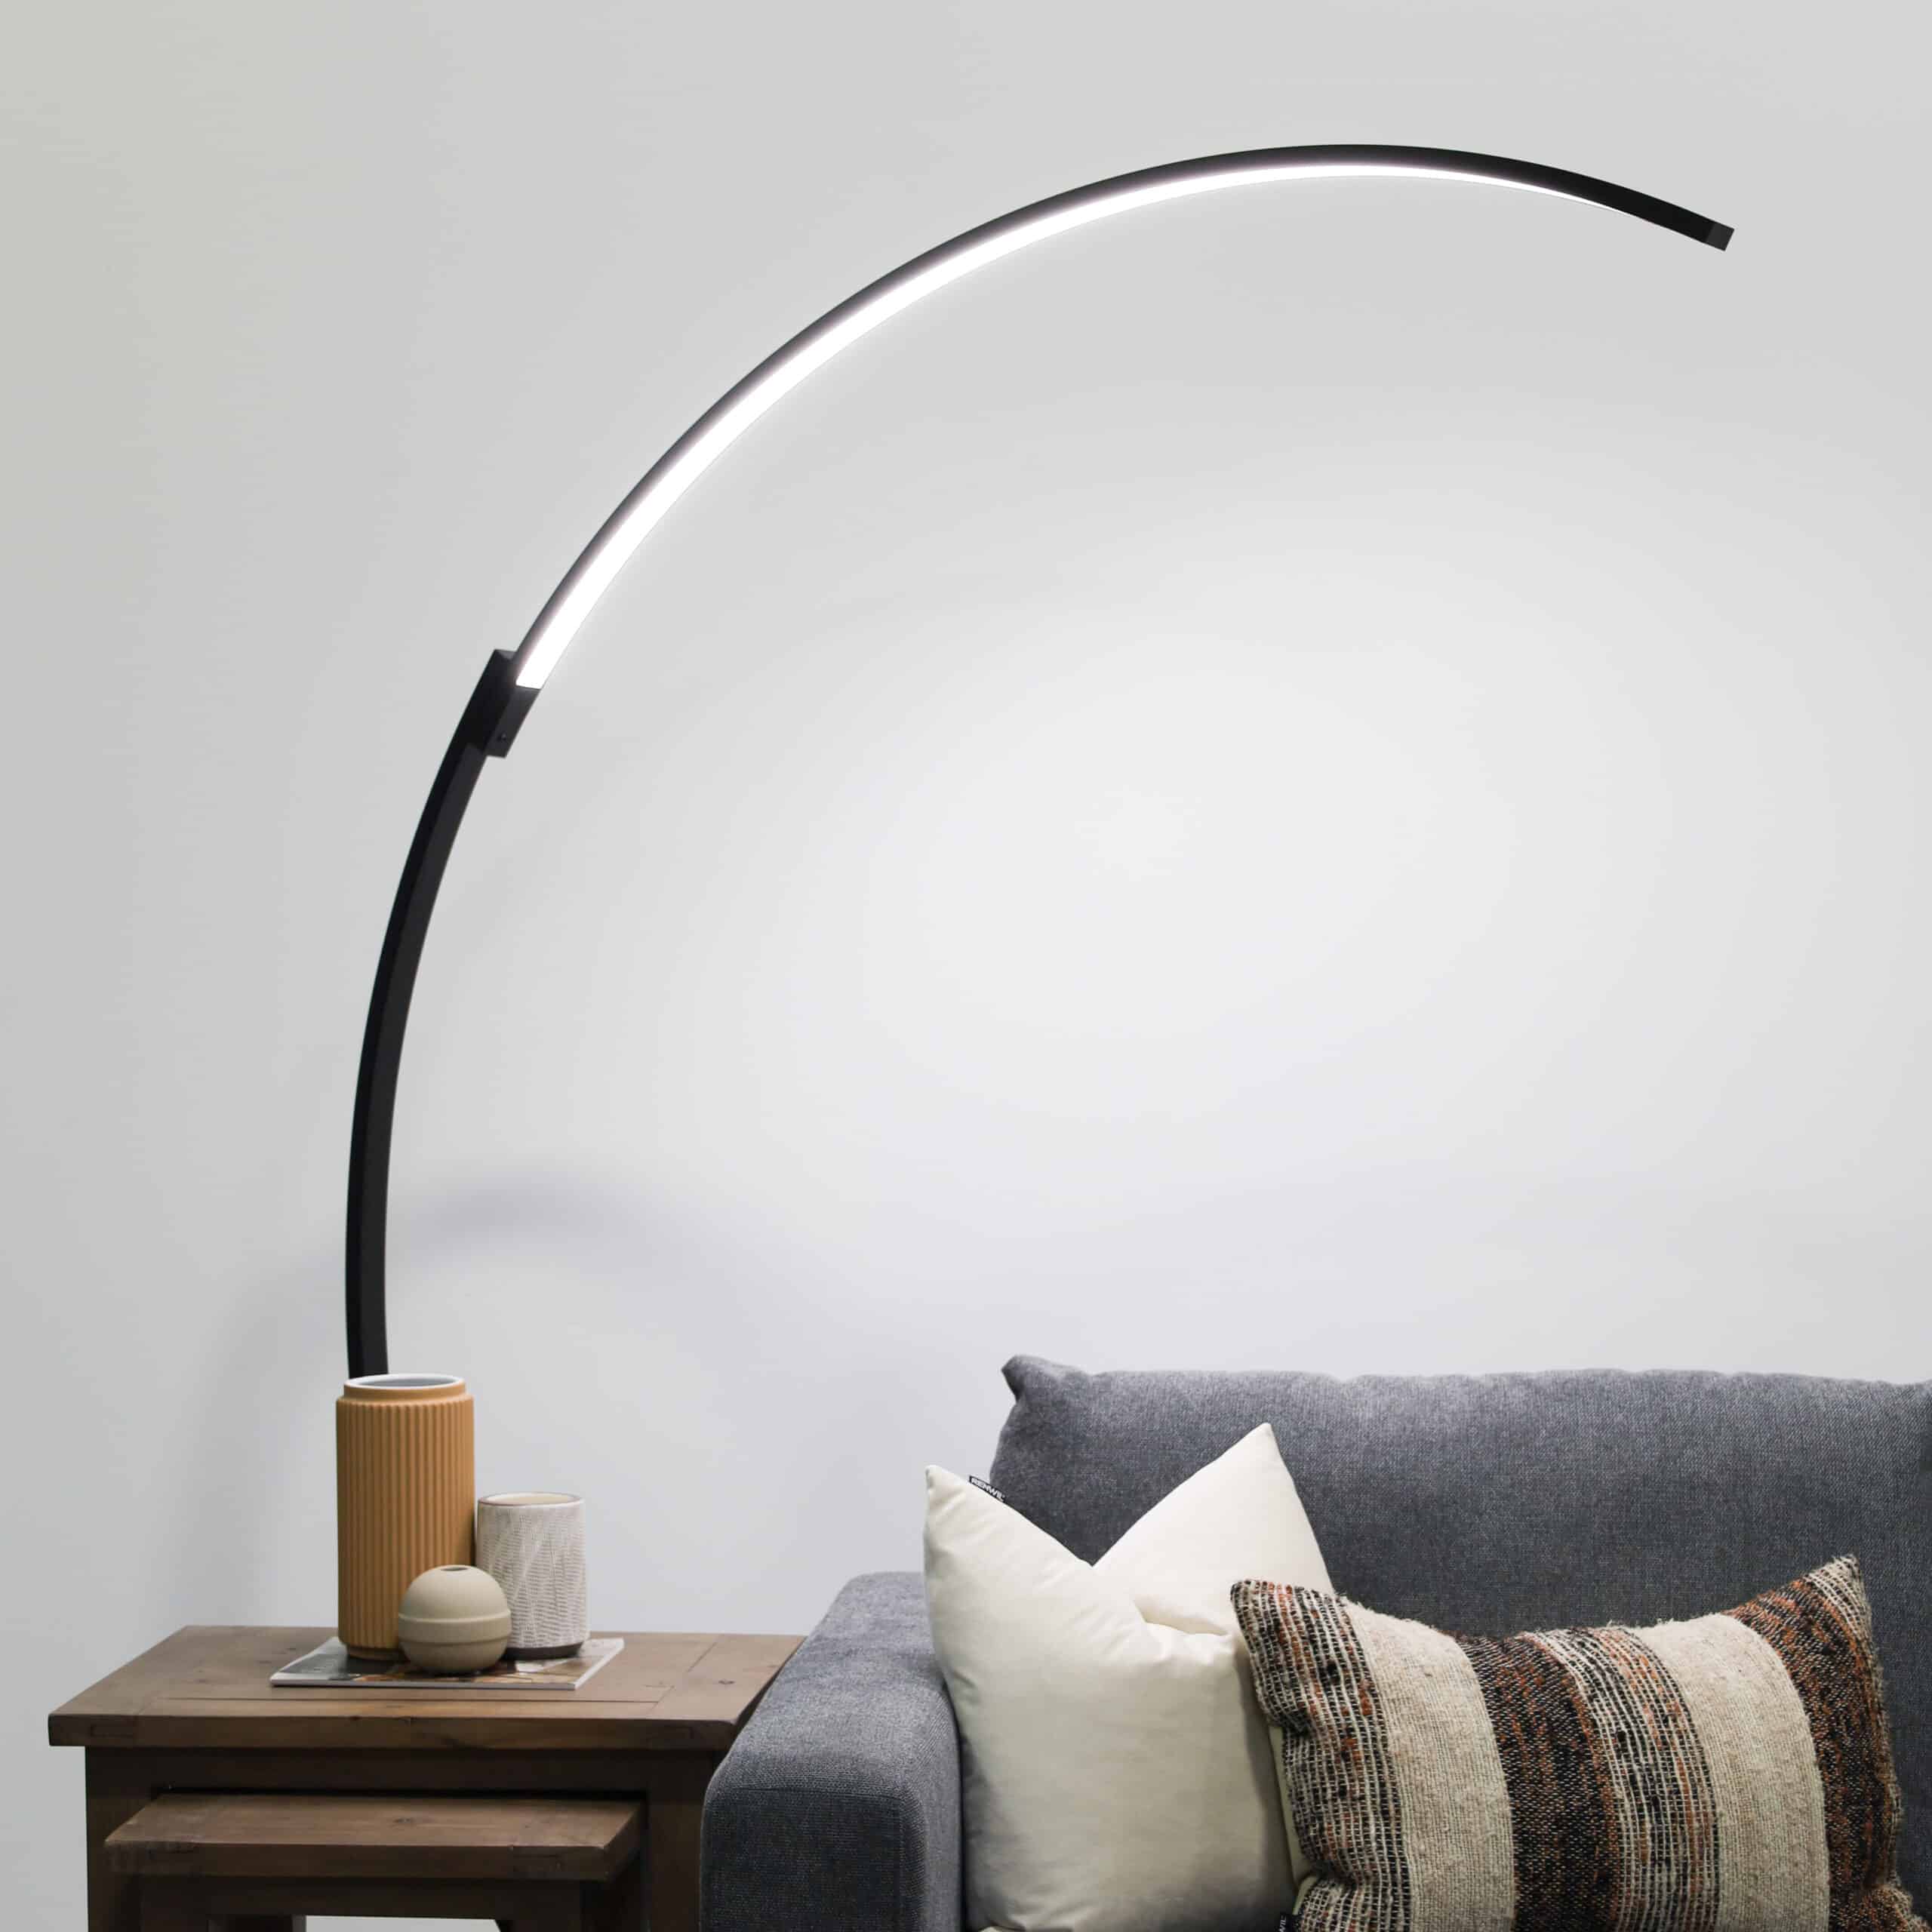 Crescent Dimmable Arc Floor Lamp - Black